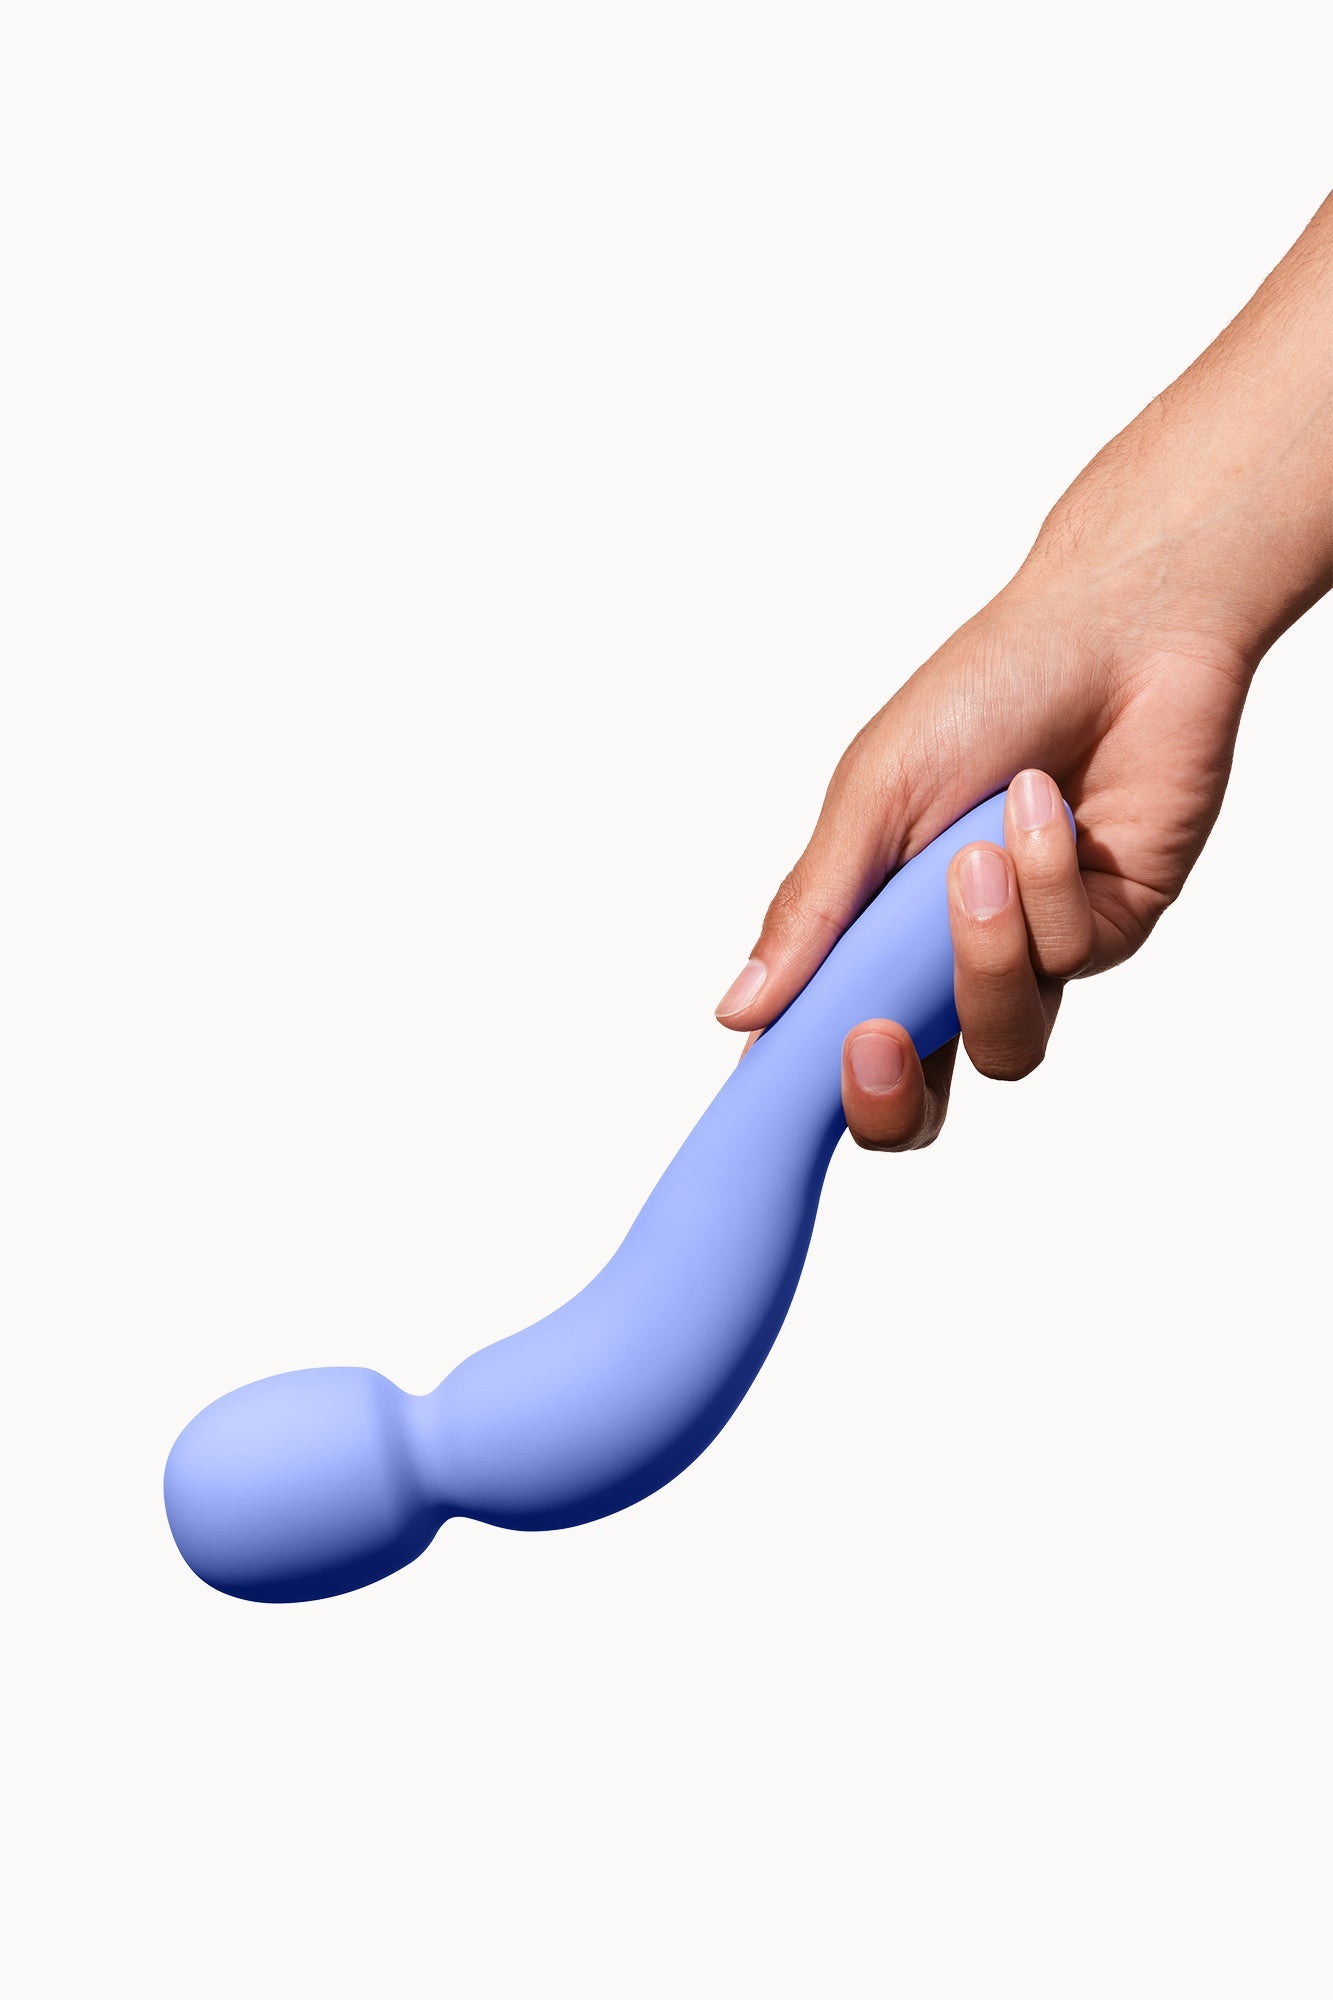 Periwinkle | Light blue vibrator being held by woman's hand.